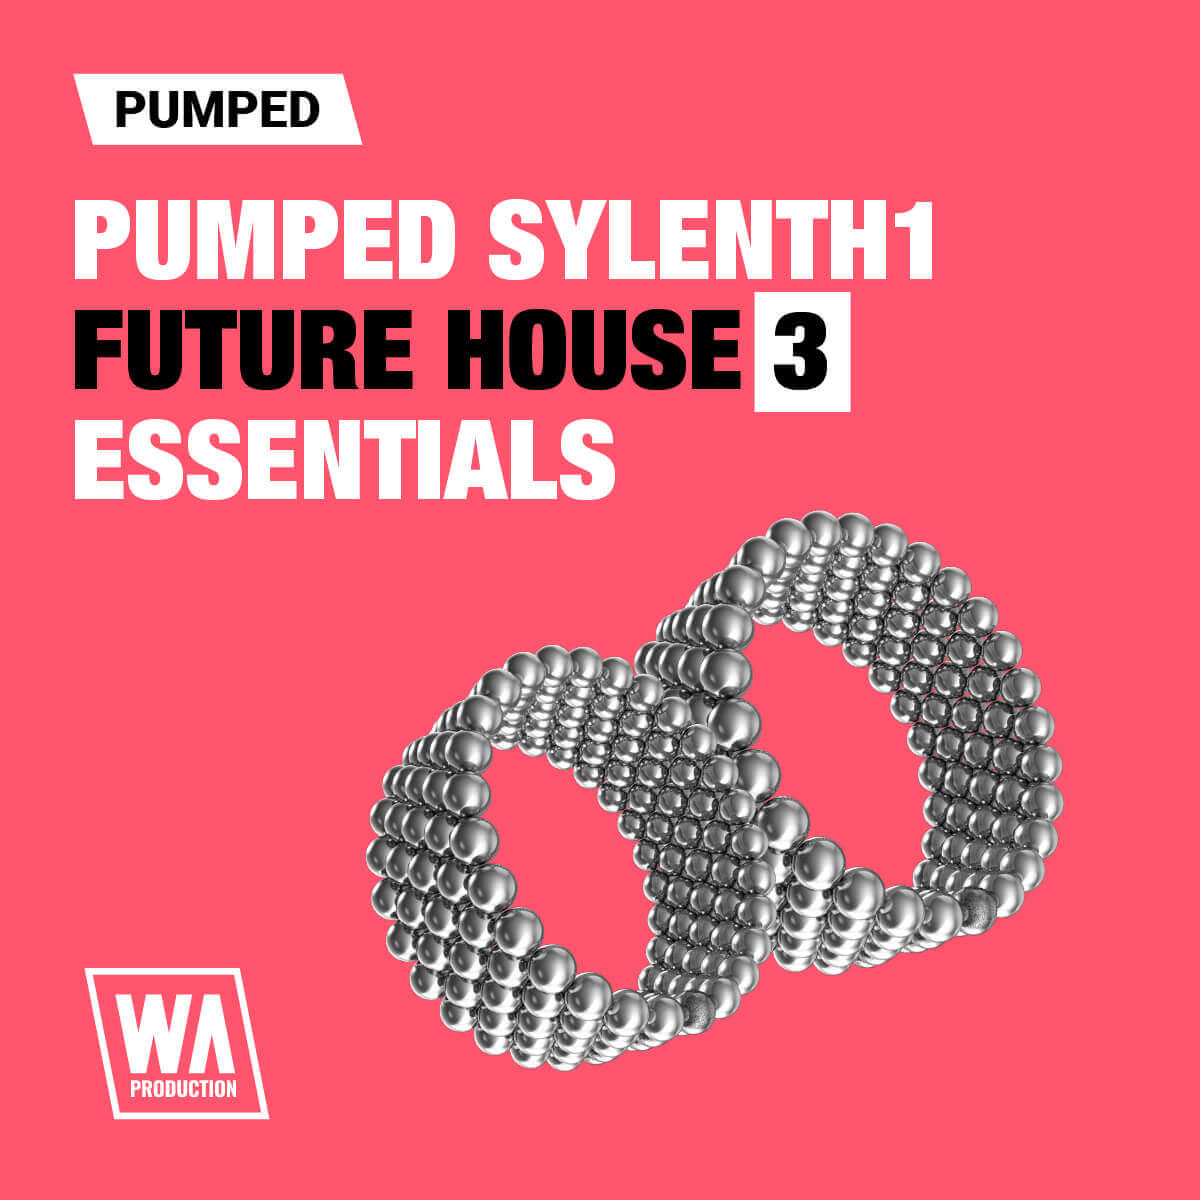 W.A. Production Pumped: Sylenth1 Future House Essentials 3